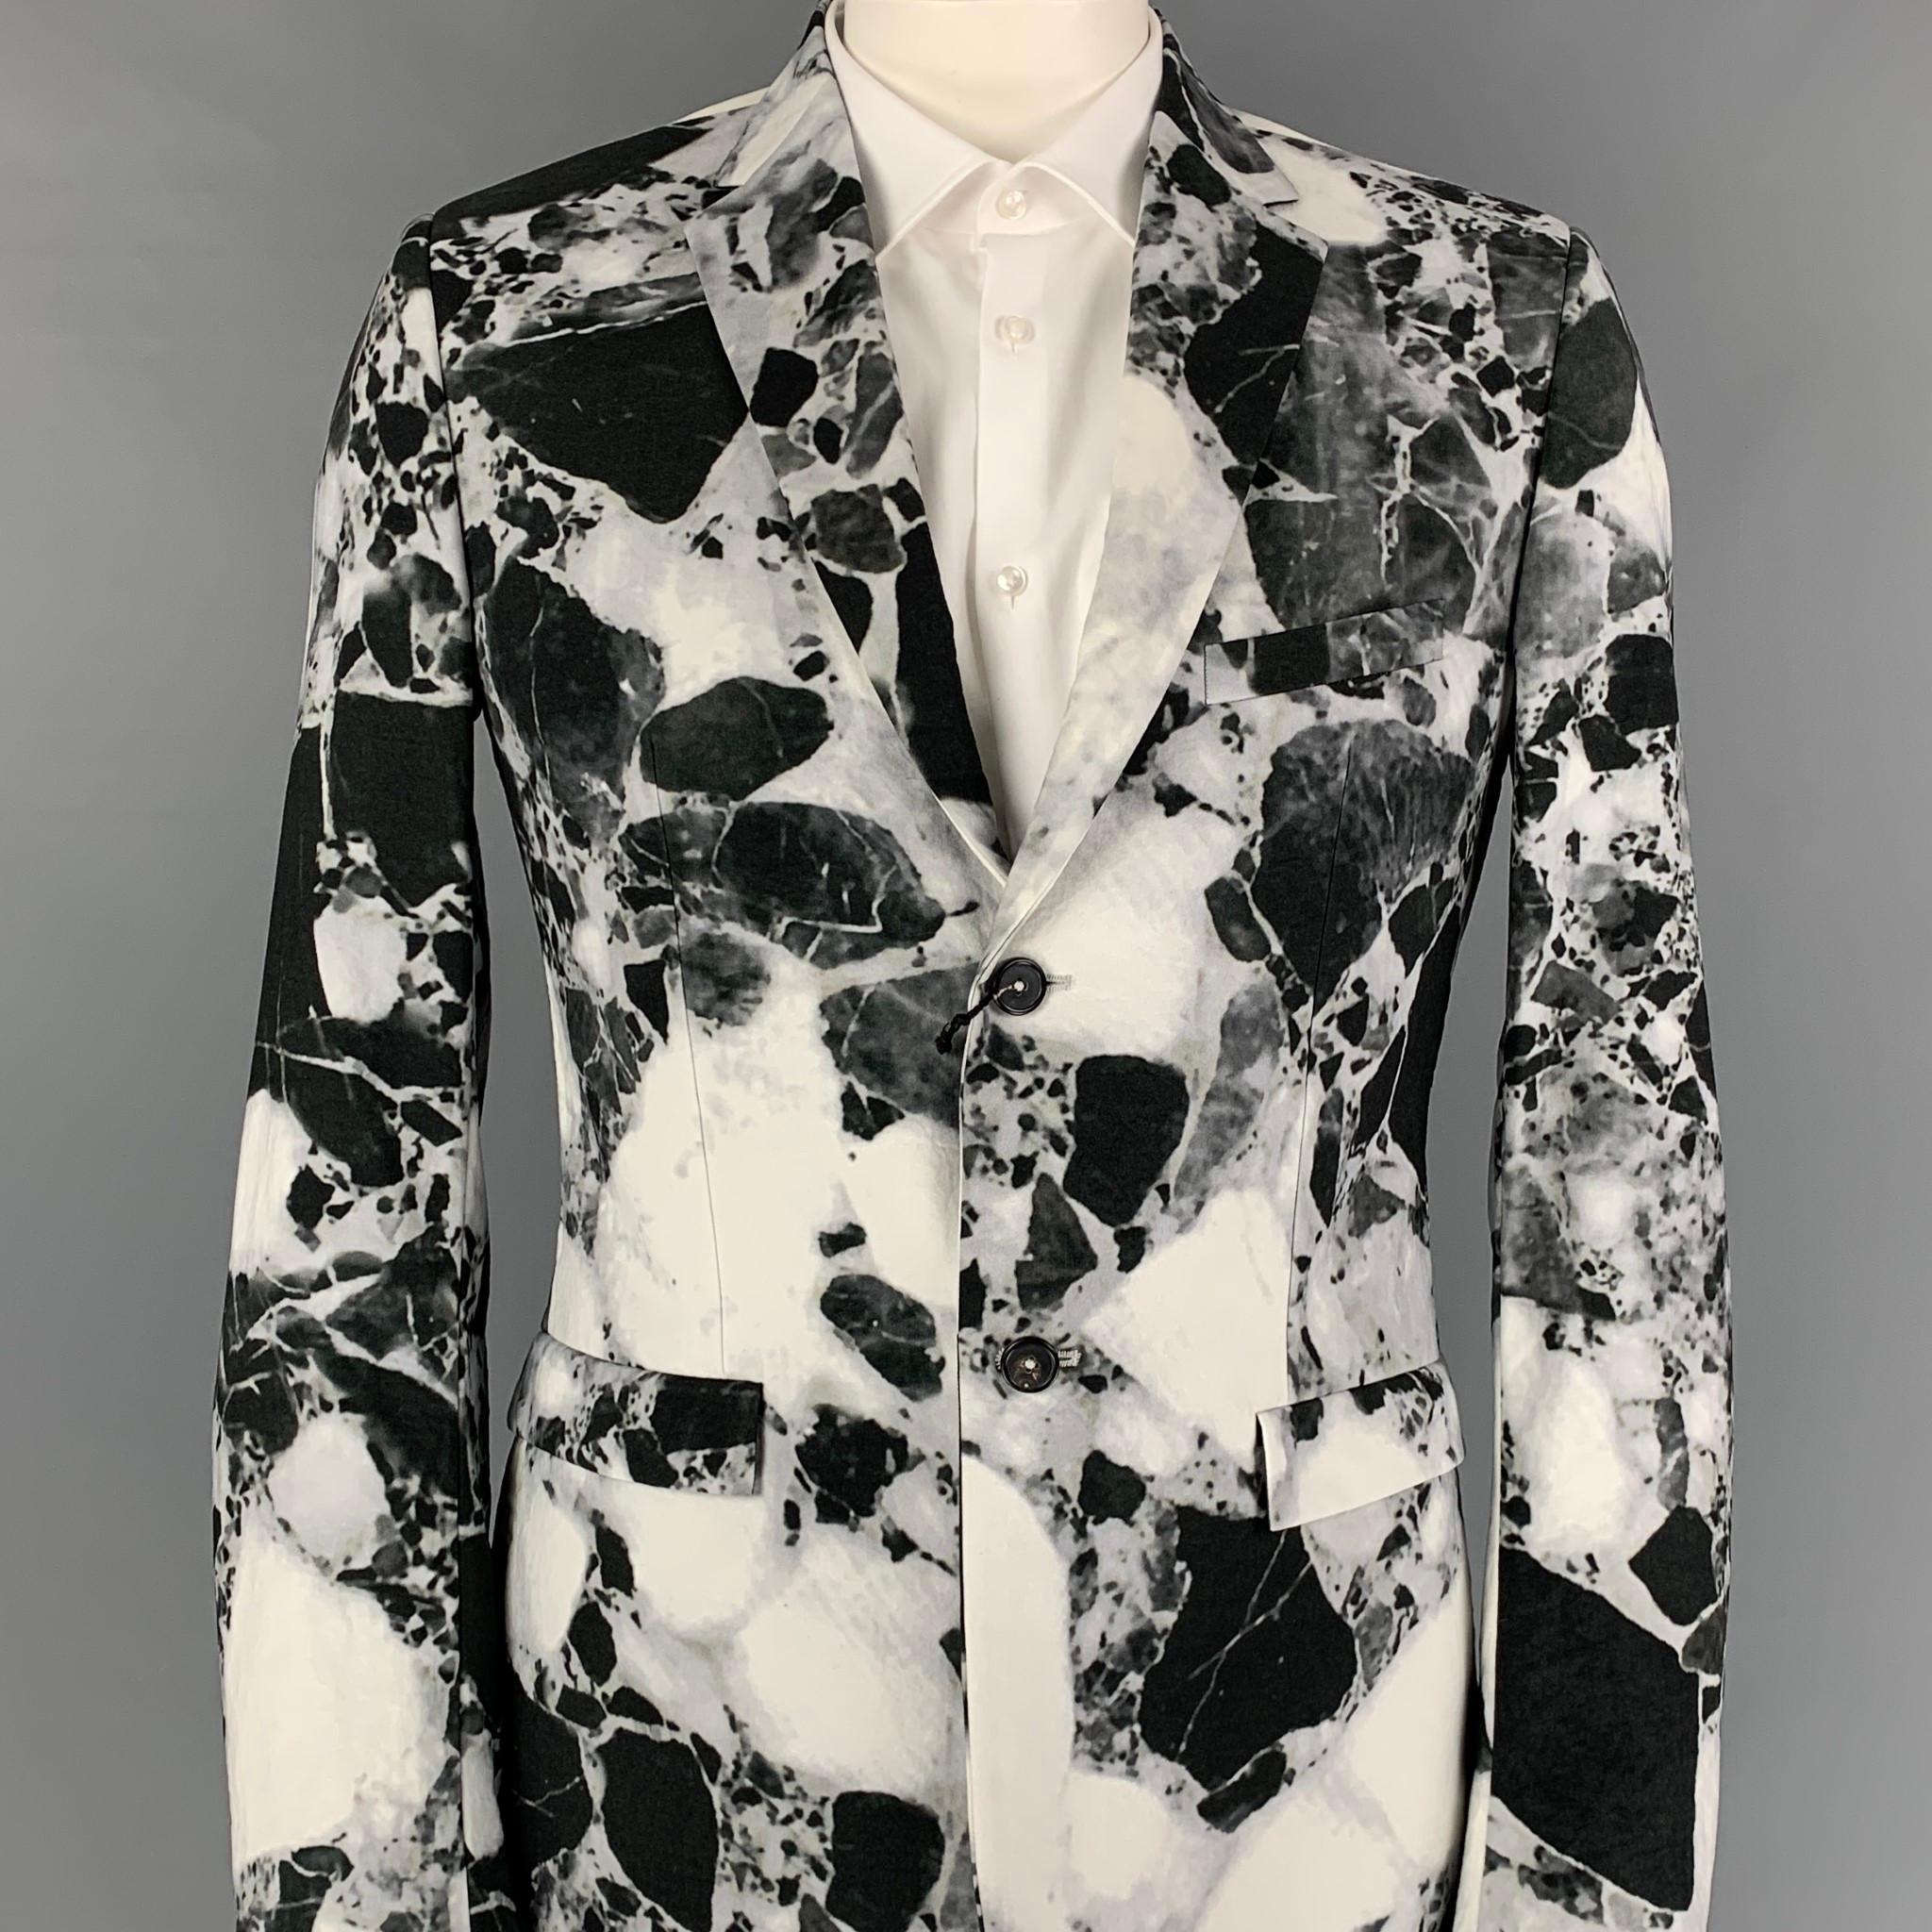 JIL SANDER by RAF SIMONS Fall-Winter 2008 sport coat comes in a black & white marble polyamide with a full liner featuring a notch lapel, flap pockets, and a double button closure. Made in Italy. 

New With Tags.
Marked: 54

Measurements:

Shoulder: